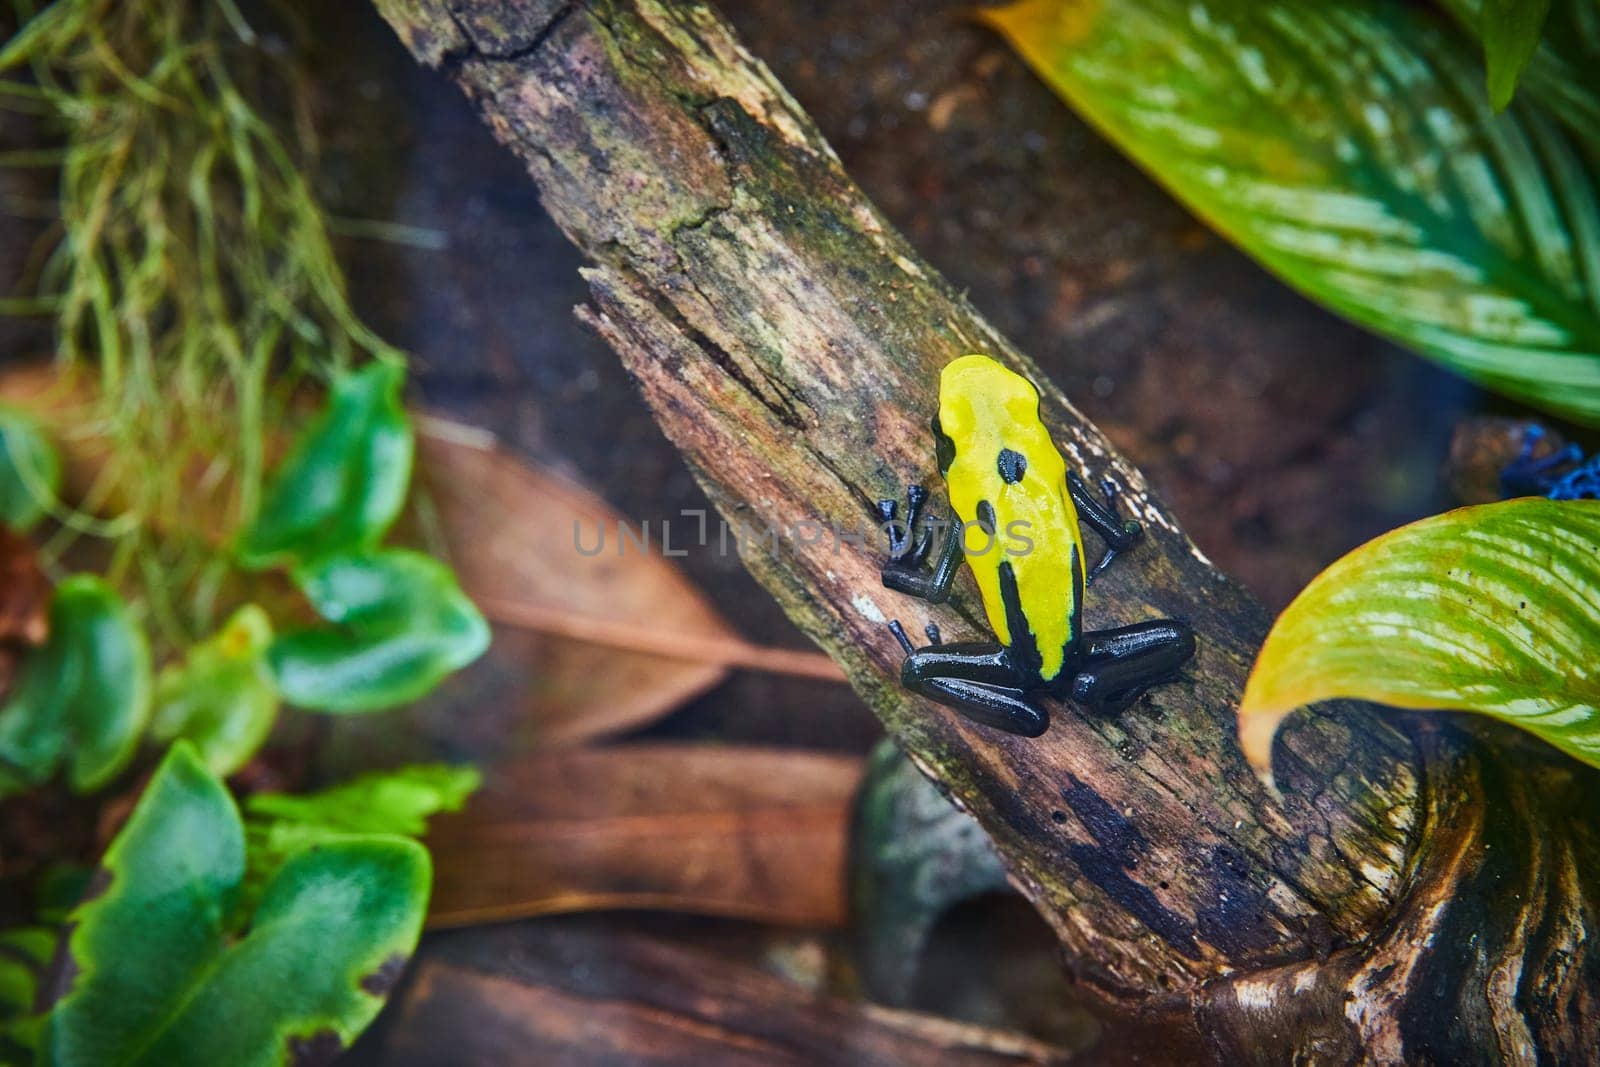 Vibrant Poison Dart Frog in Muncie Conservatory - A Striking Display of Tropical Wildlife in Indiana, 2023